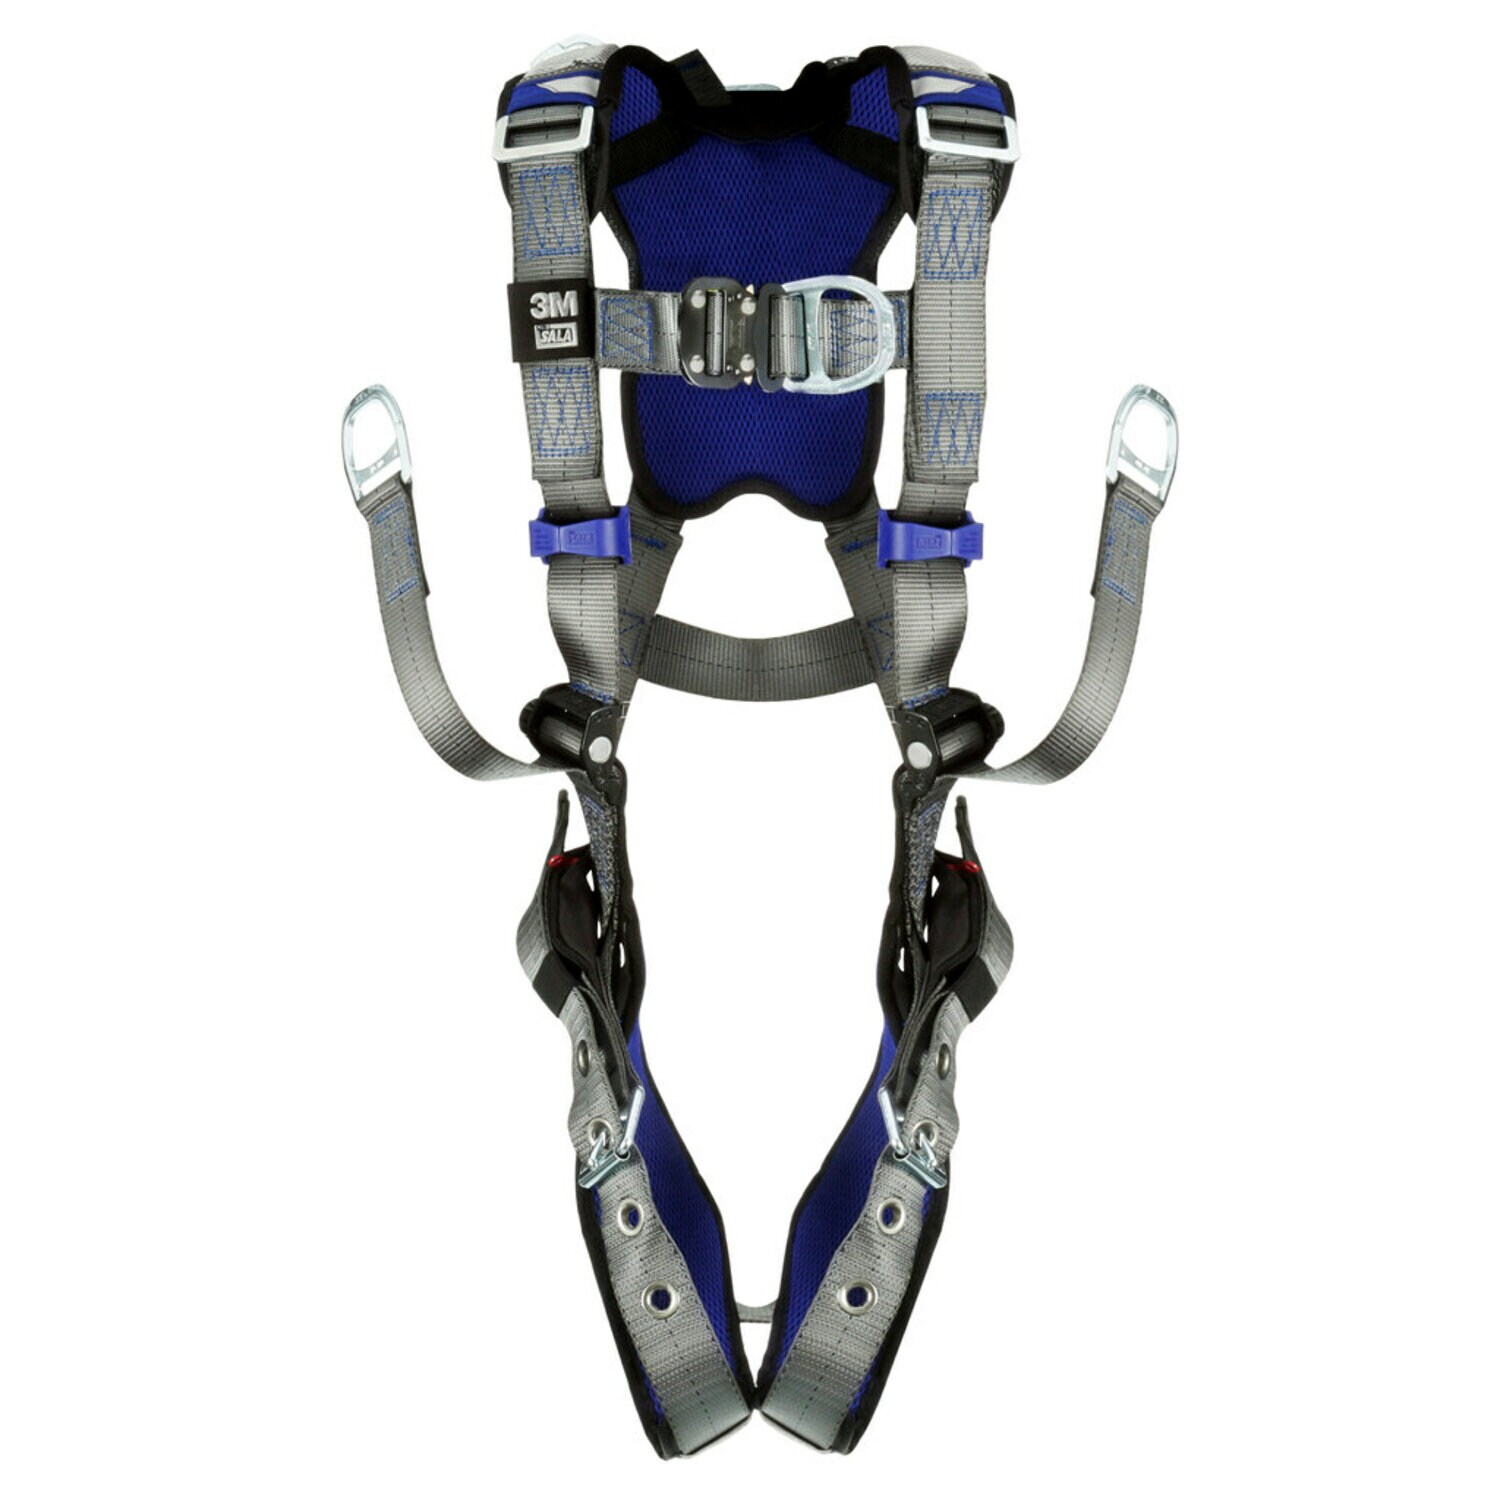 7012817863 - 3M DBI-SALA ExoFit X200 Comfort Oil & Gas Climbing/Suspension Safety Harness 1402120, Small